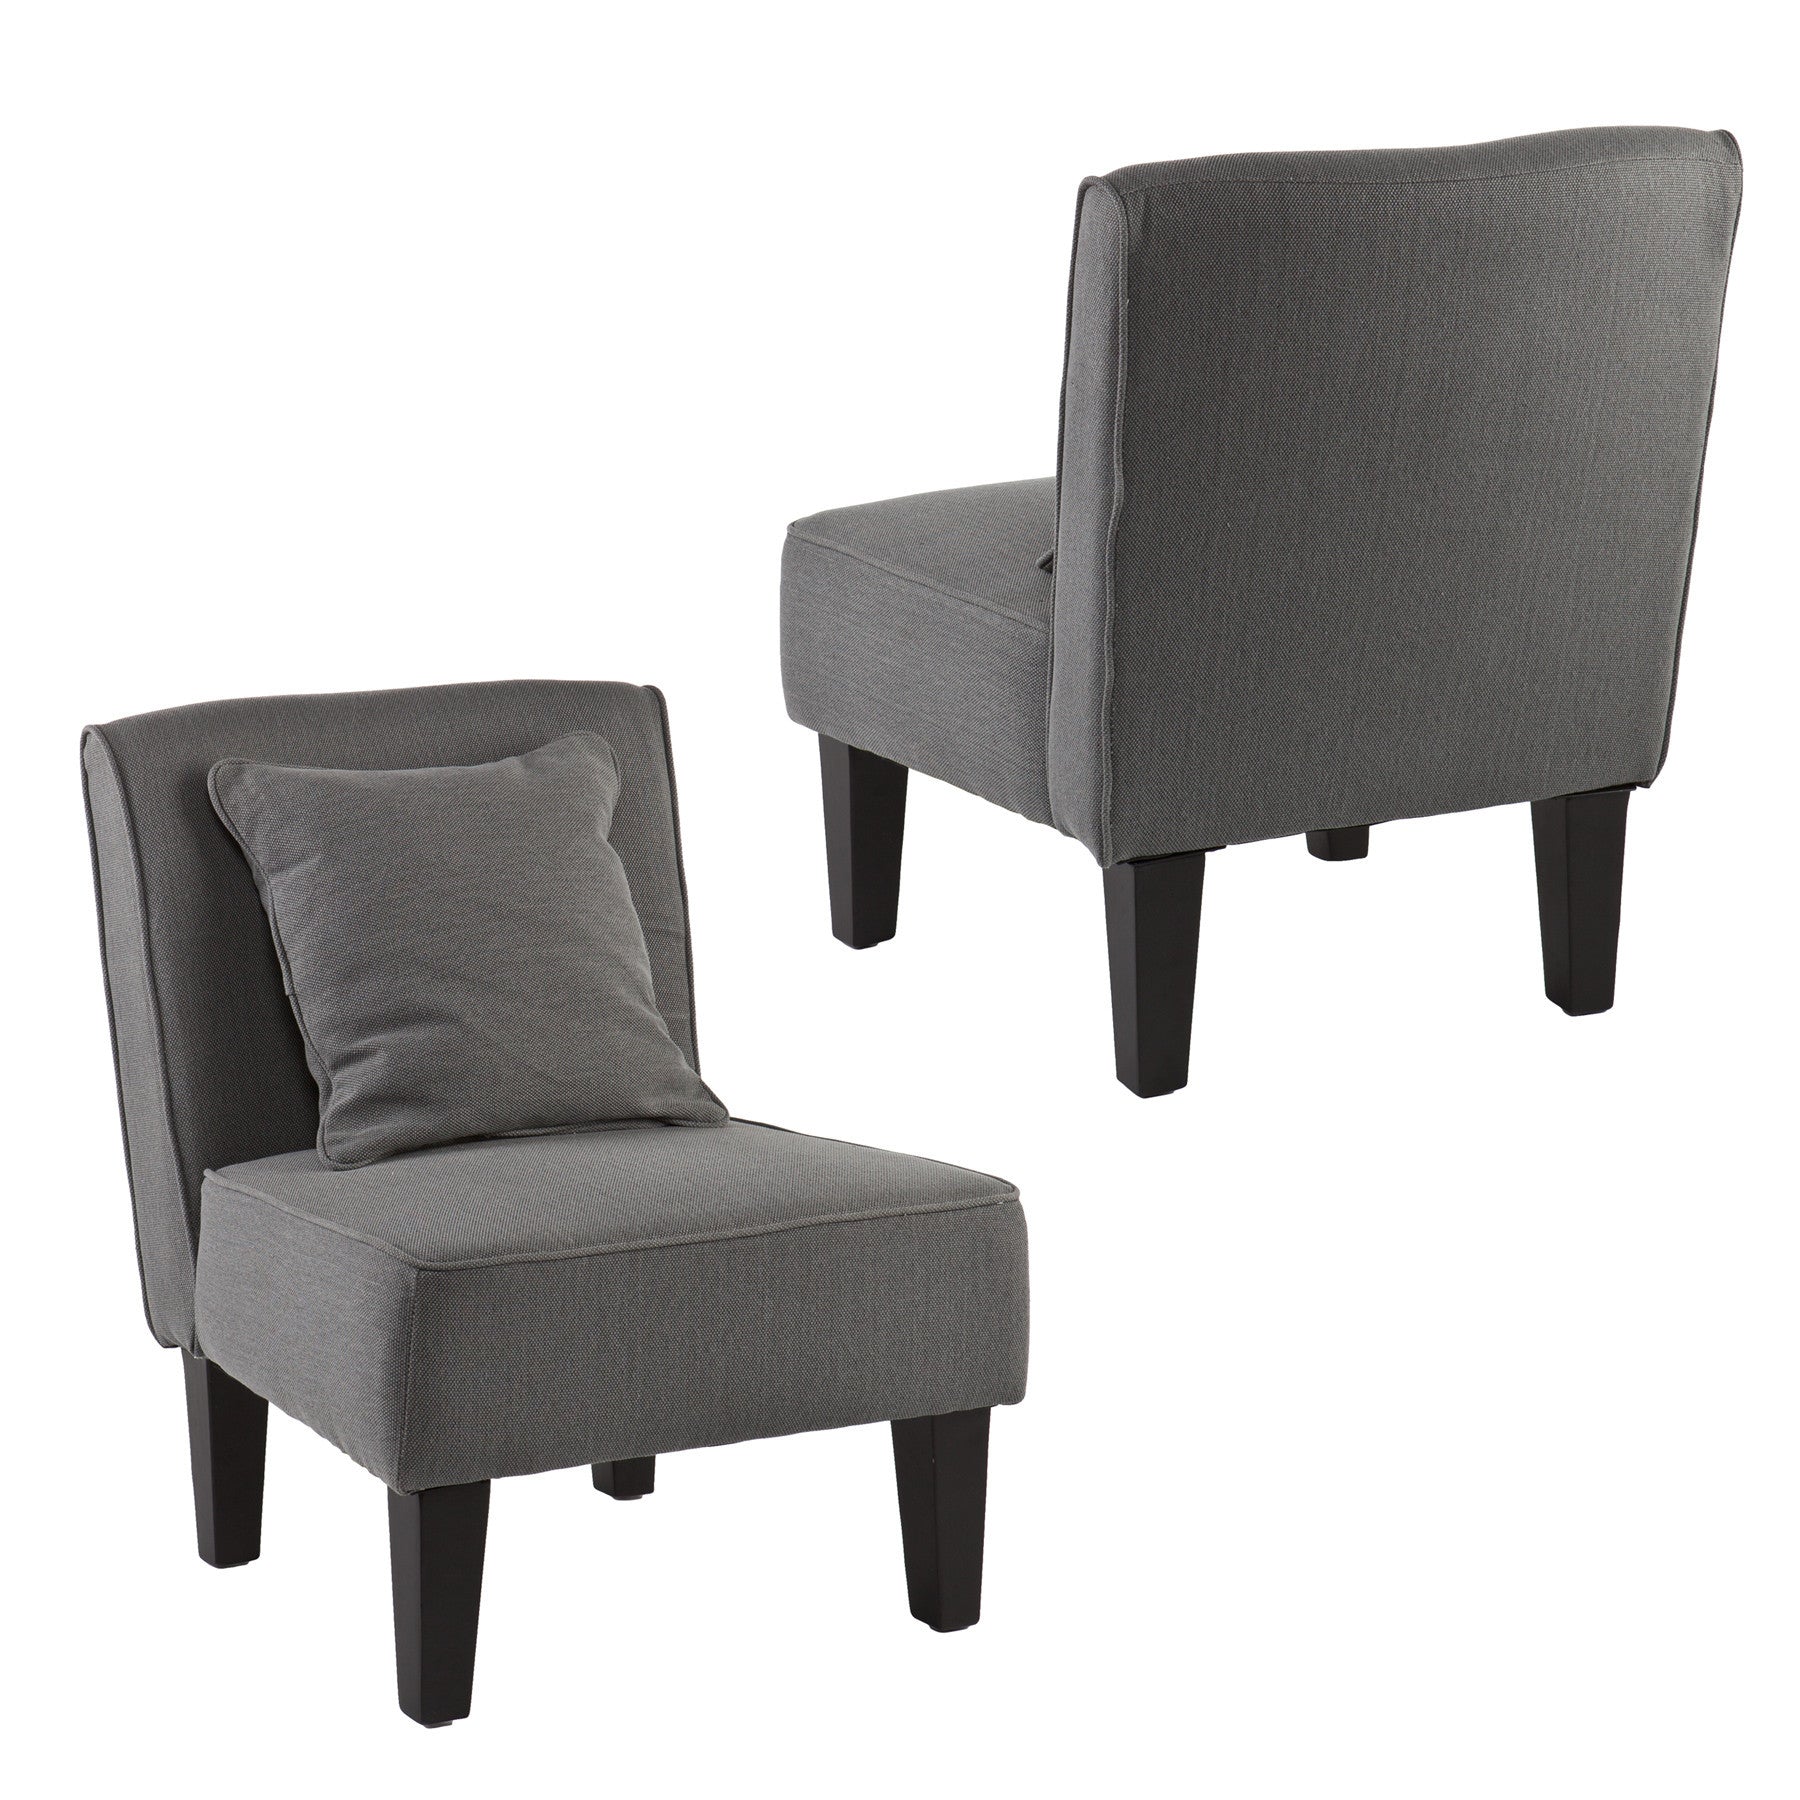 Purban Lounge Chair Cool Gray (Set of 2)